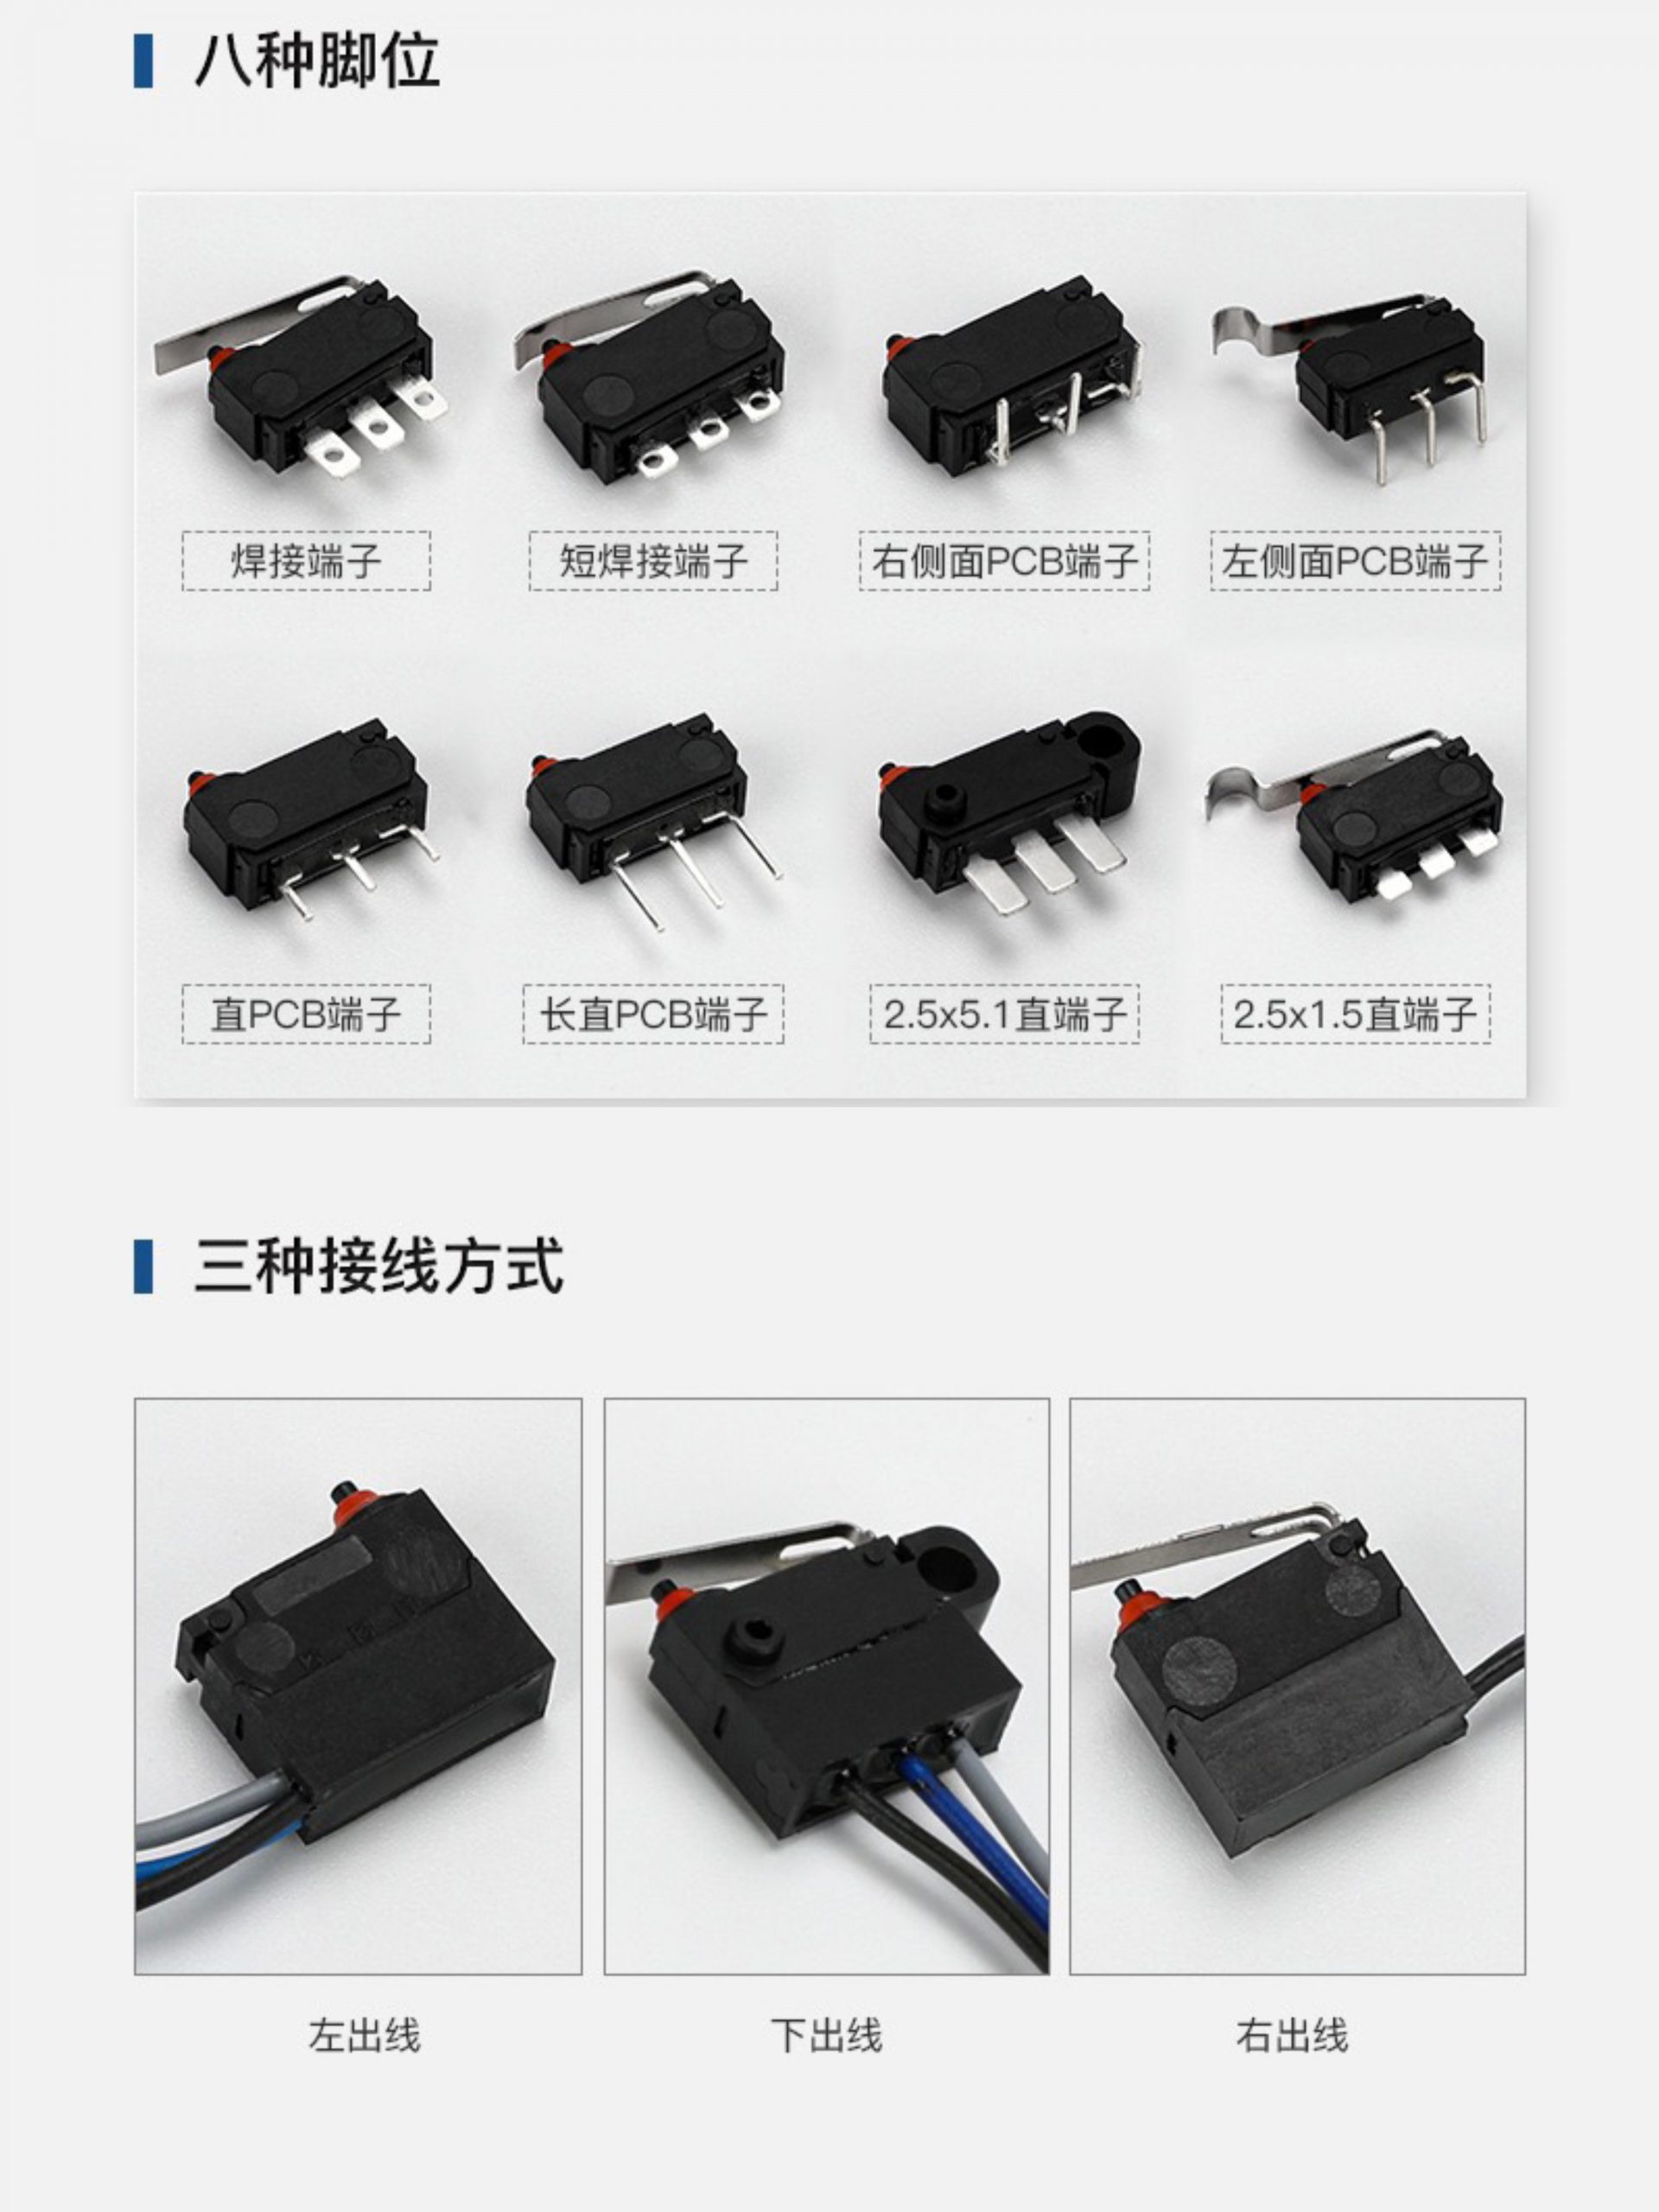 IS A MICRO SWITCH MOMENTARY?插图5